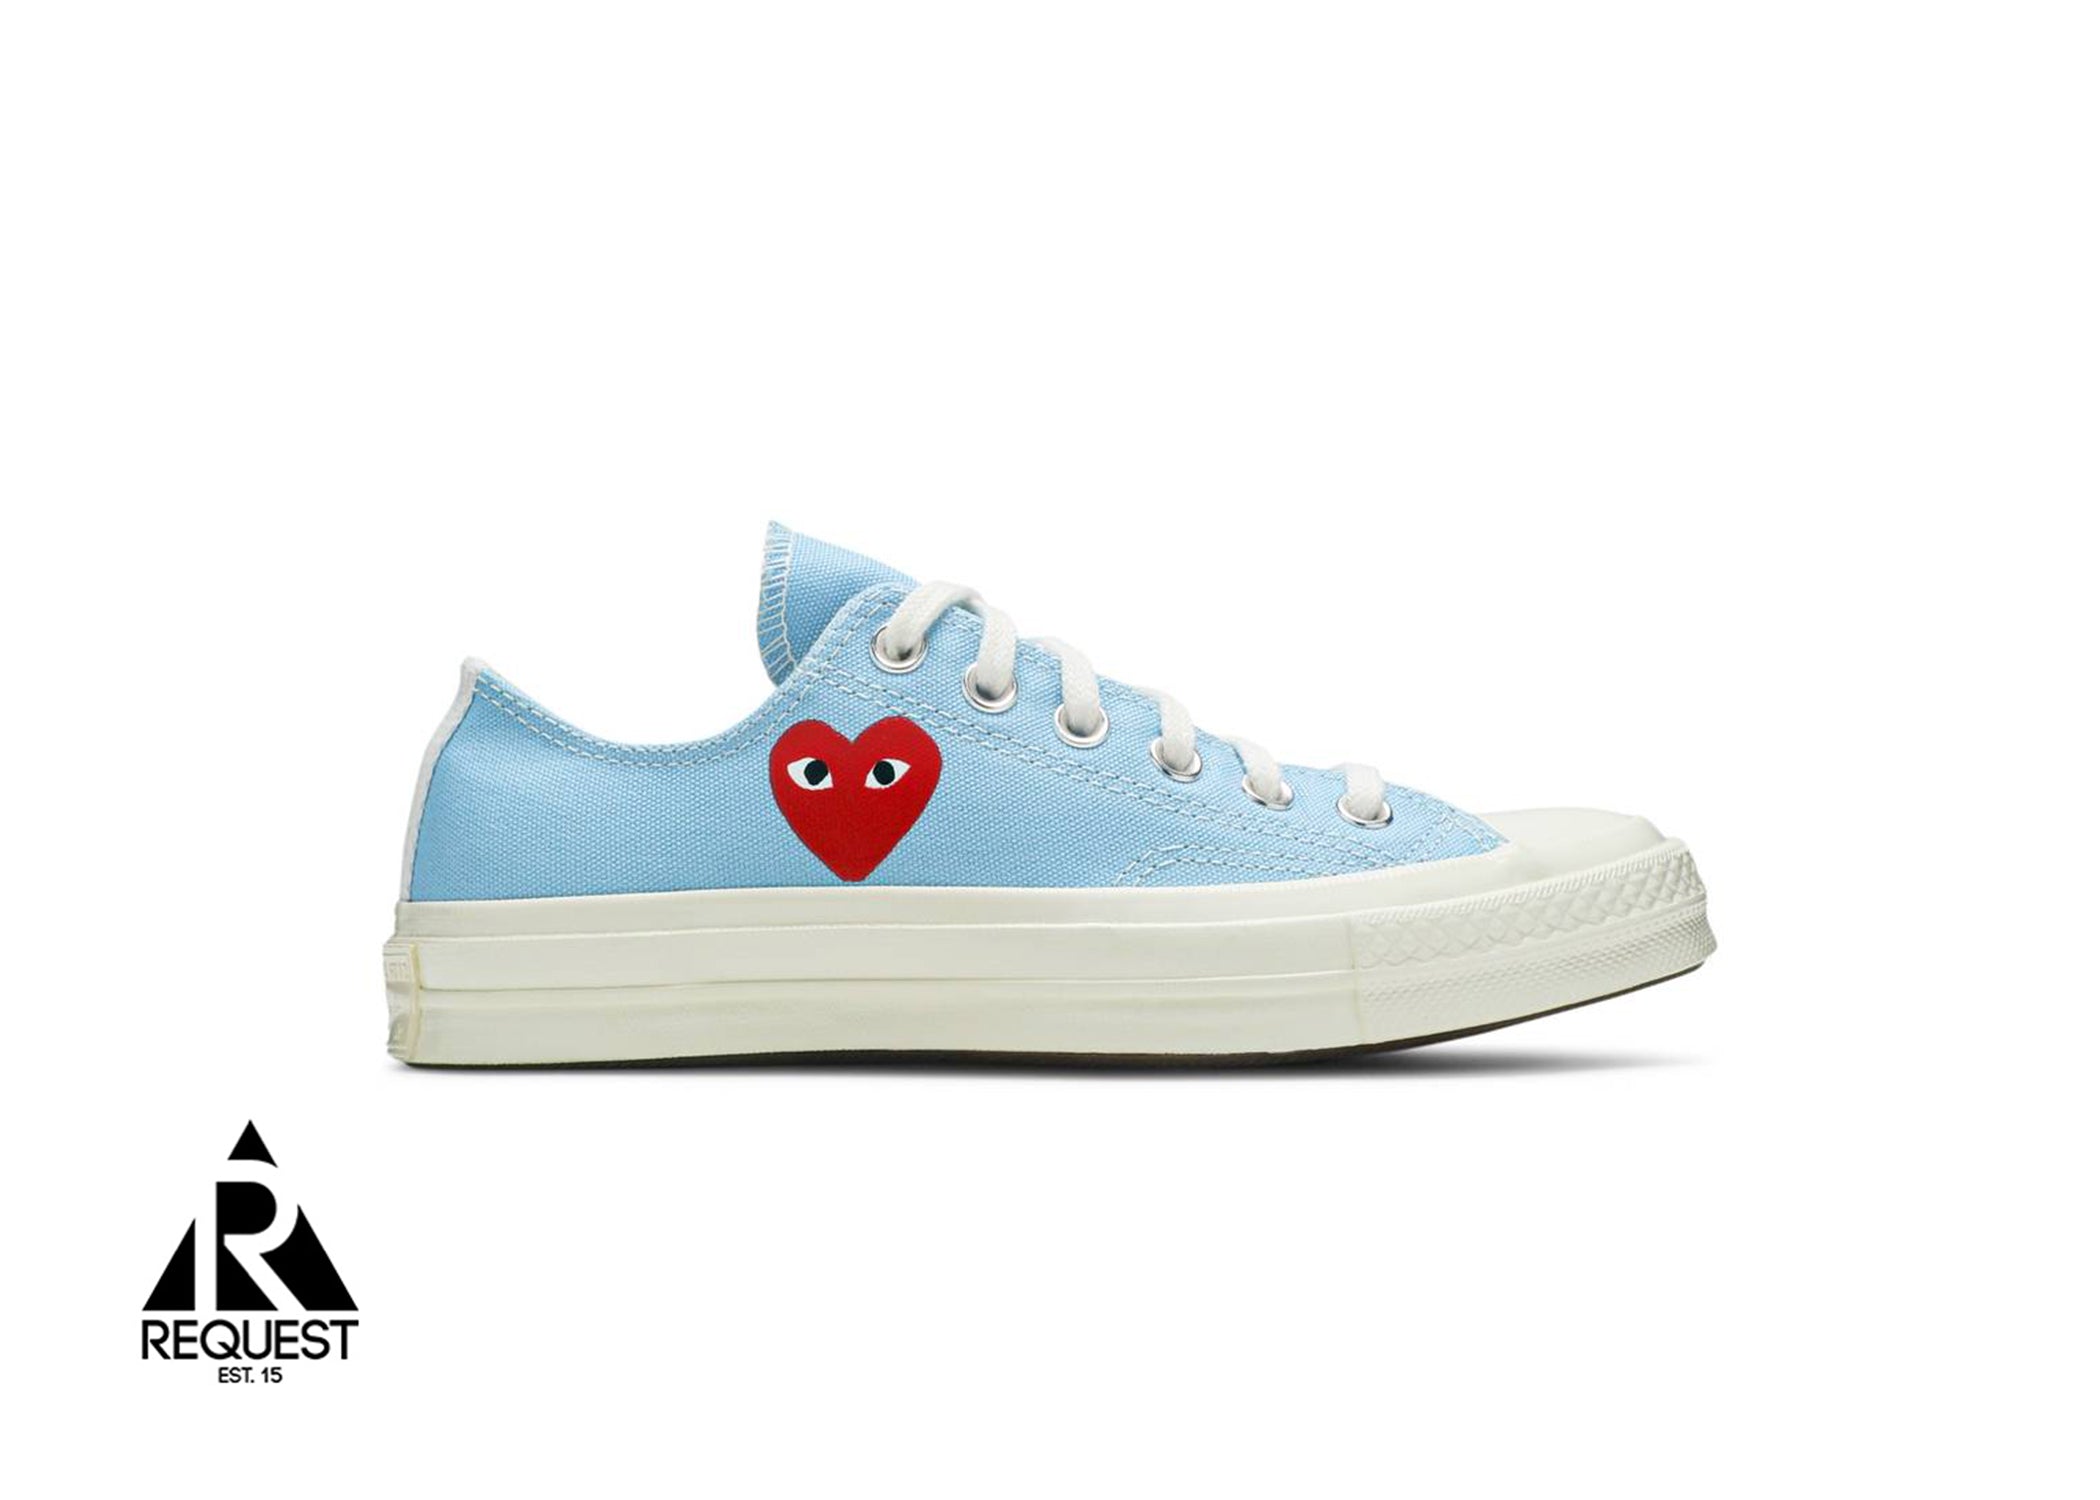 Converse Chuck Taylor All-Star 70s Ox “CDG Bright Blue”